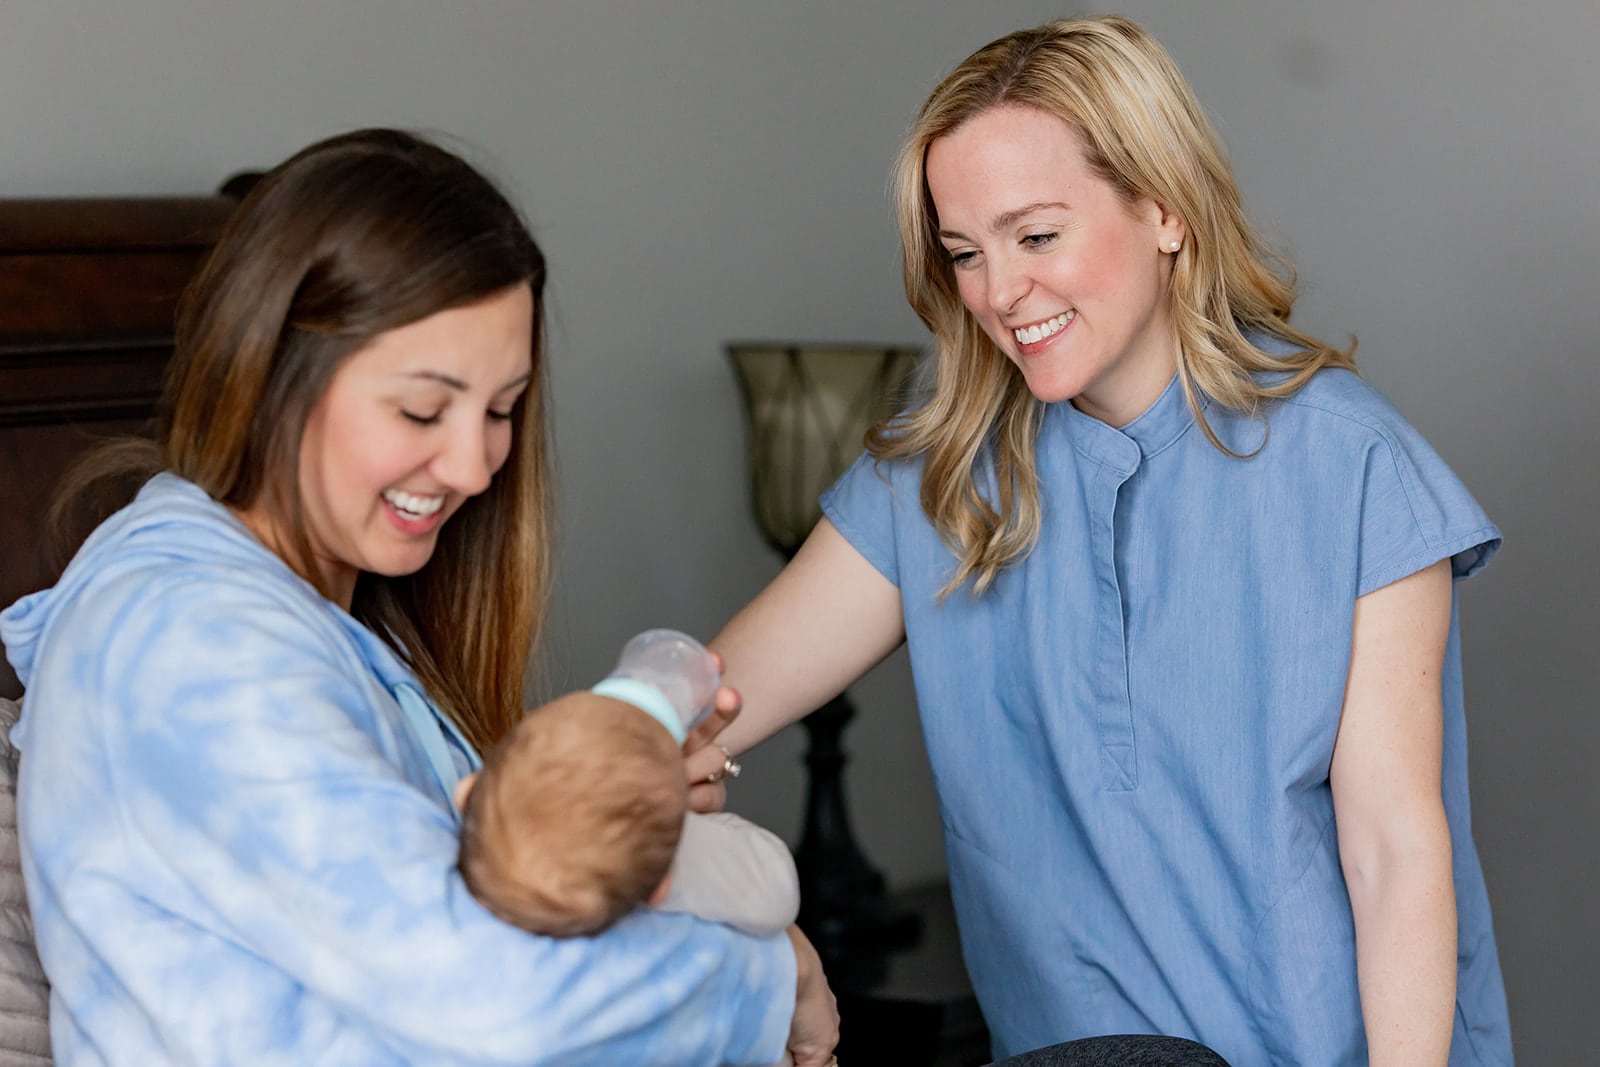 Postpartum doula helping a new mom with her baby as she feeds her baby boy a bottle.